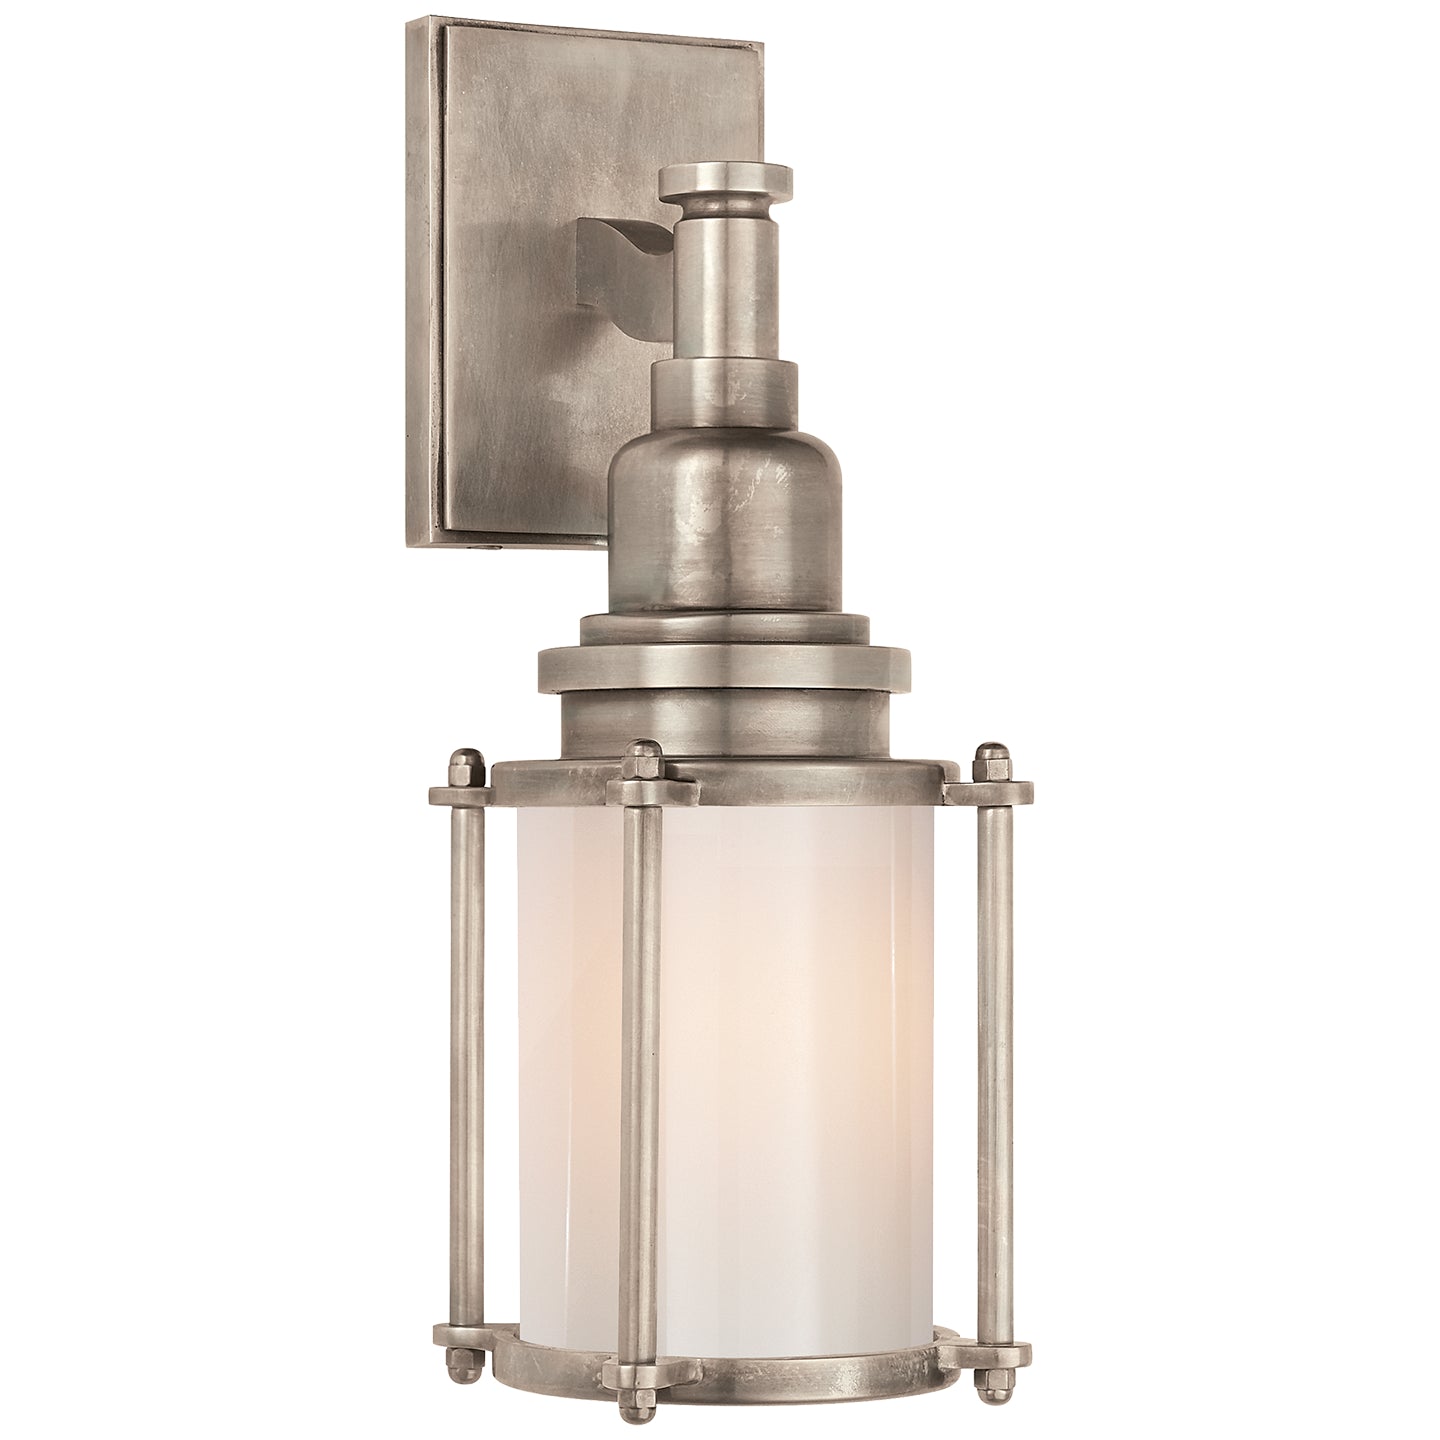 Visual Comfort Signature - CHD 2050AN-WG - One Light Wall Sconce - Stanway - Antique Nickel